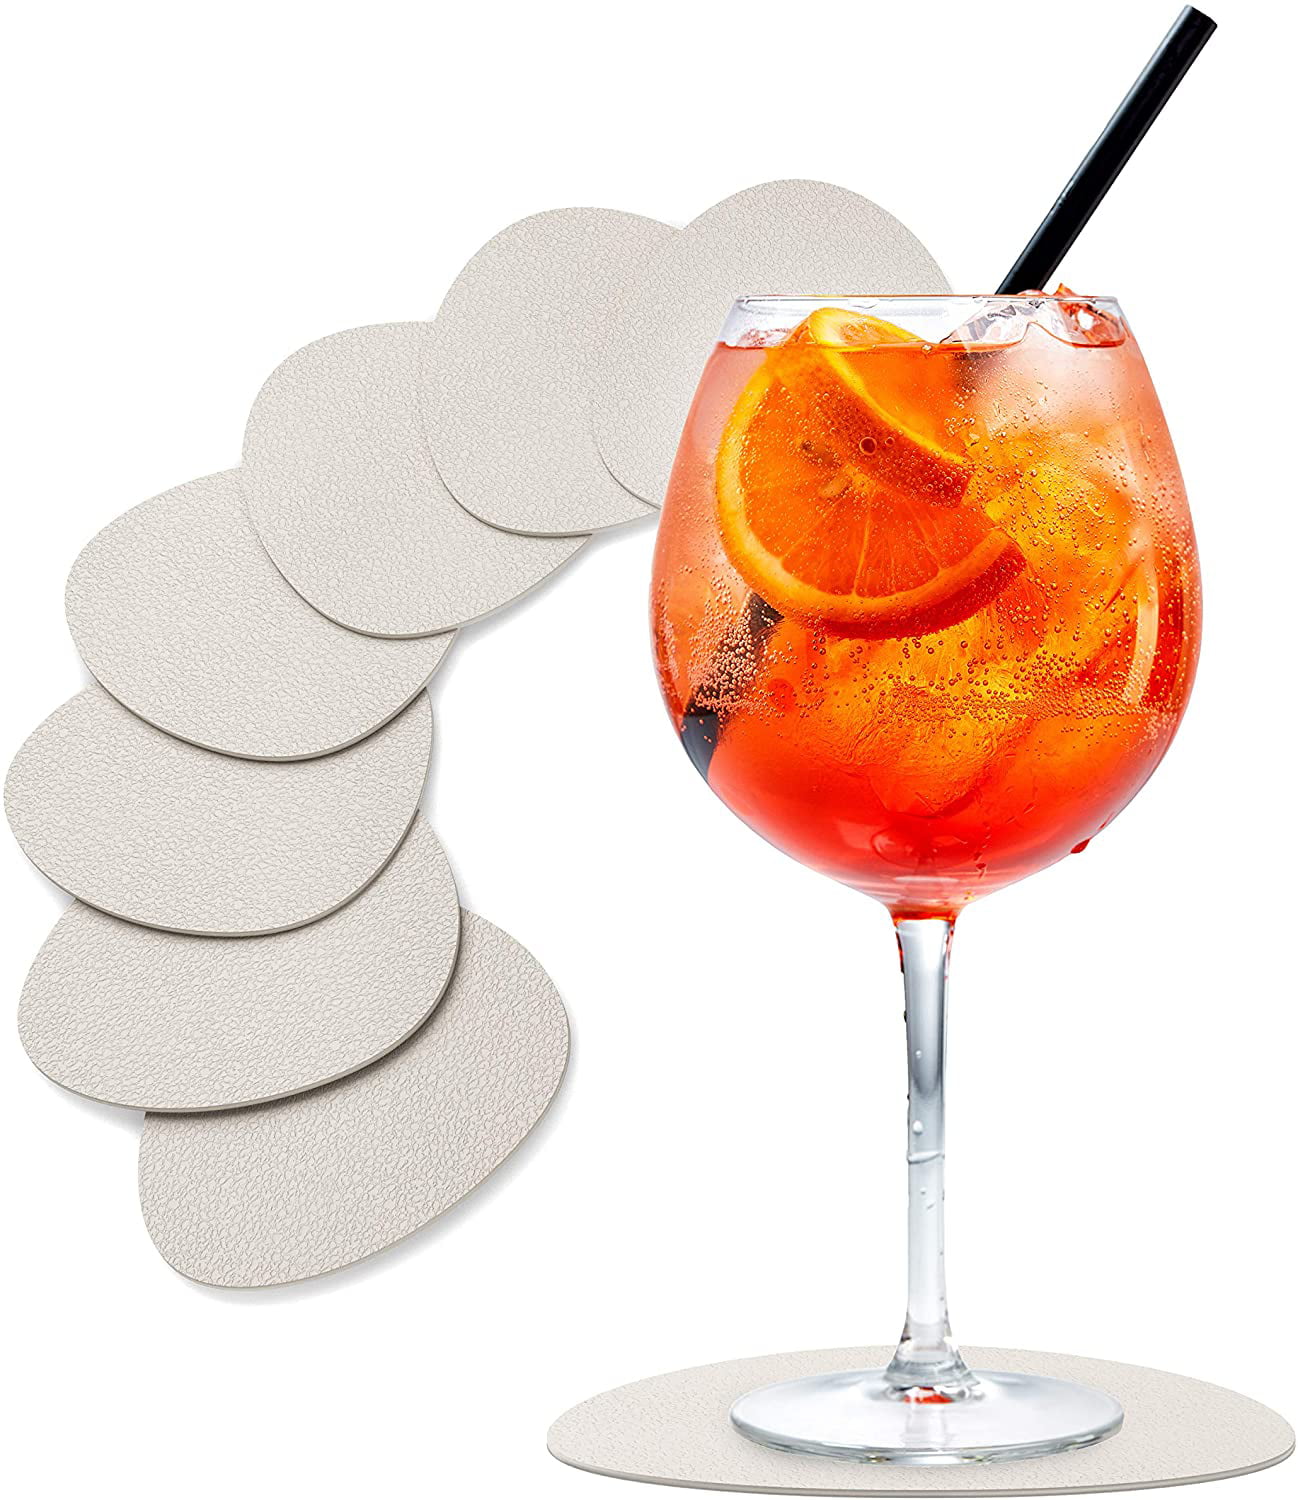 Metal Surfaces For All Size Cups Set of 8 Modern Silicone Coaster Protective Coasters for Glass for Drinks Wooden Stone Tea; Table Coffee Beverage Non Slip & Non Stick